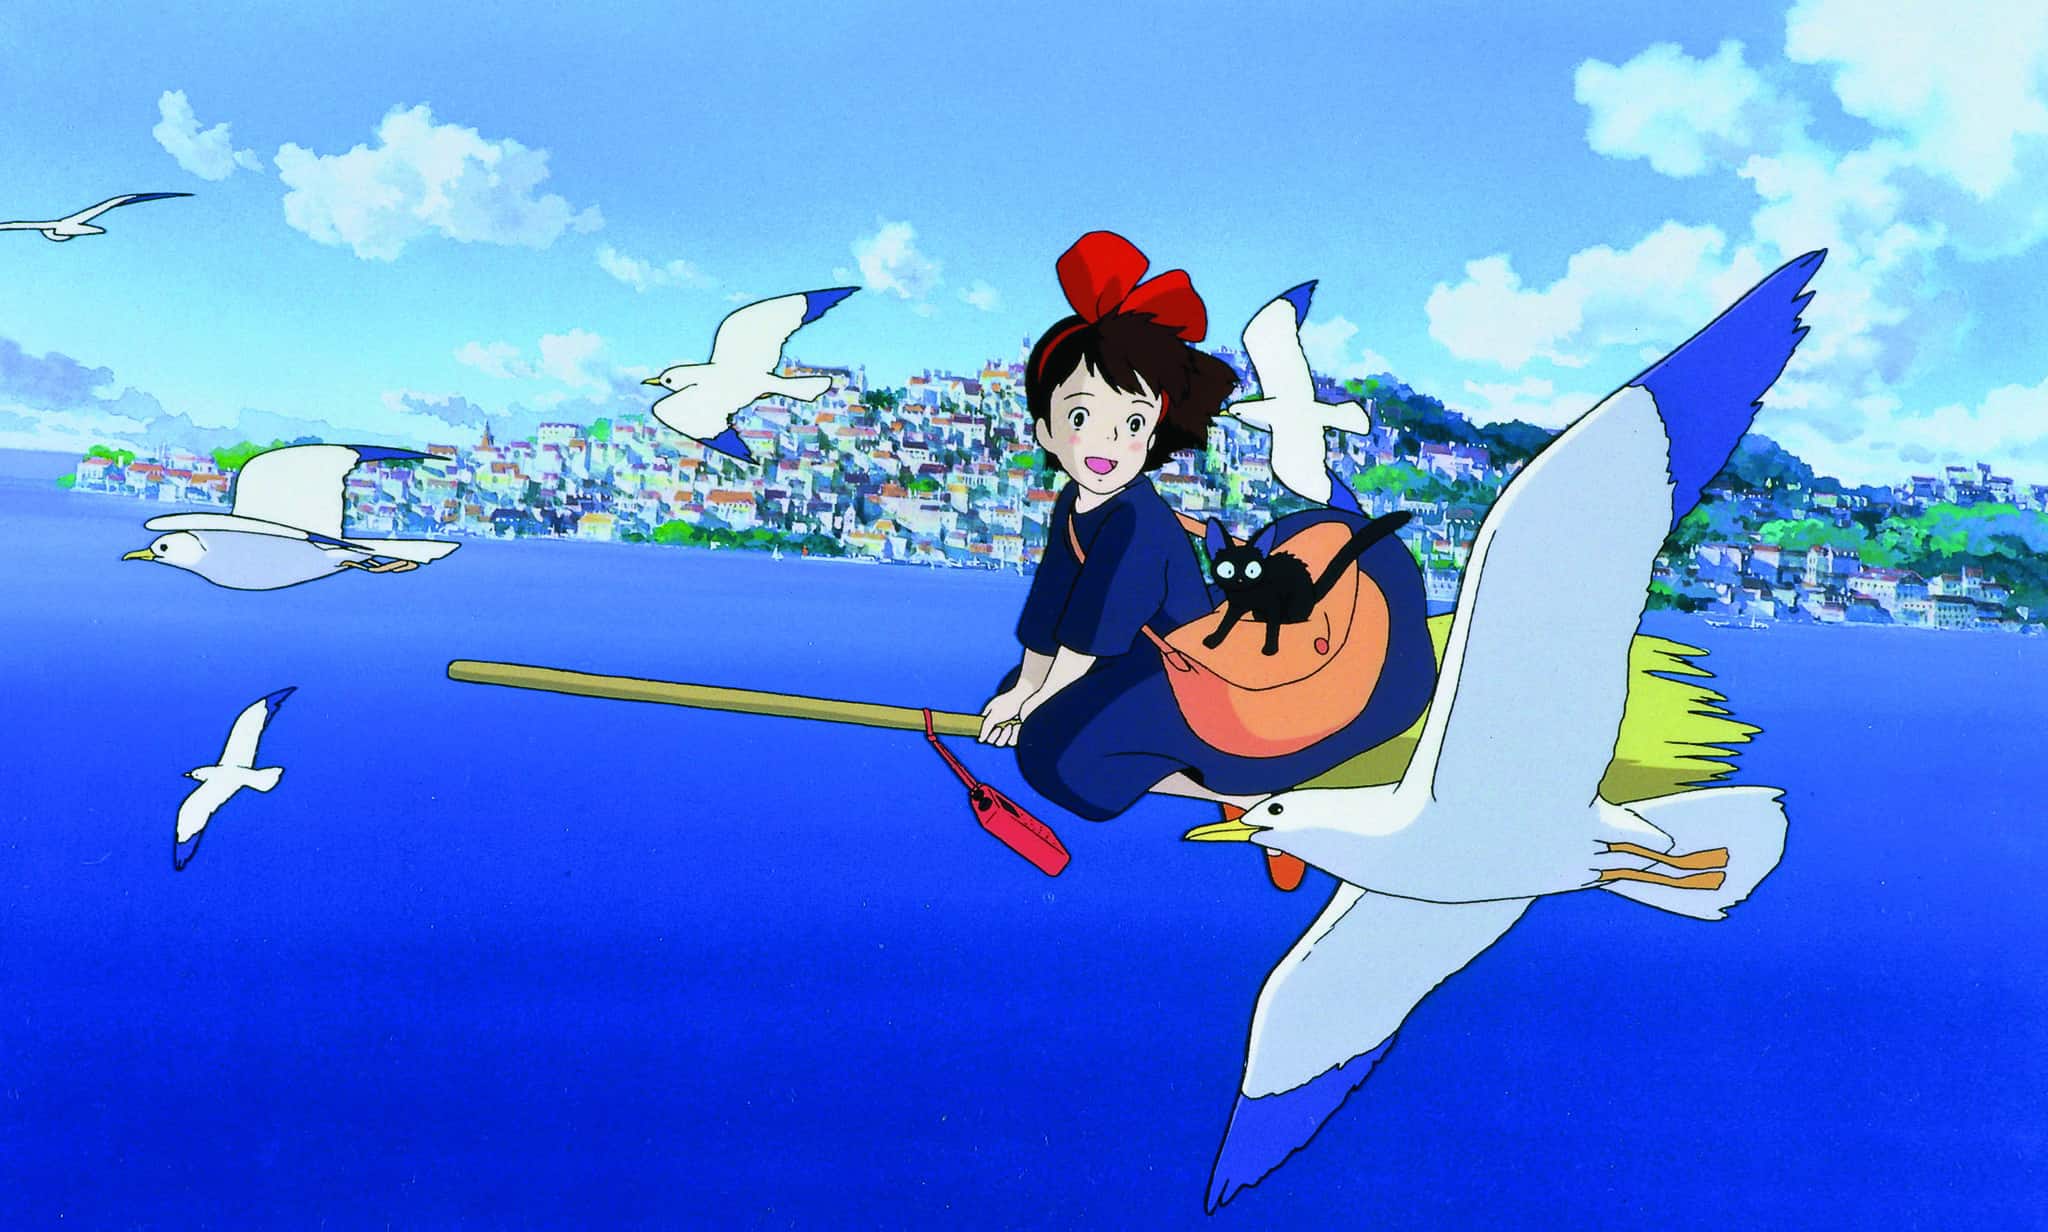 Animated girl rides a broomstick in this image from Studio Ghibli.